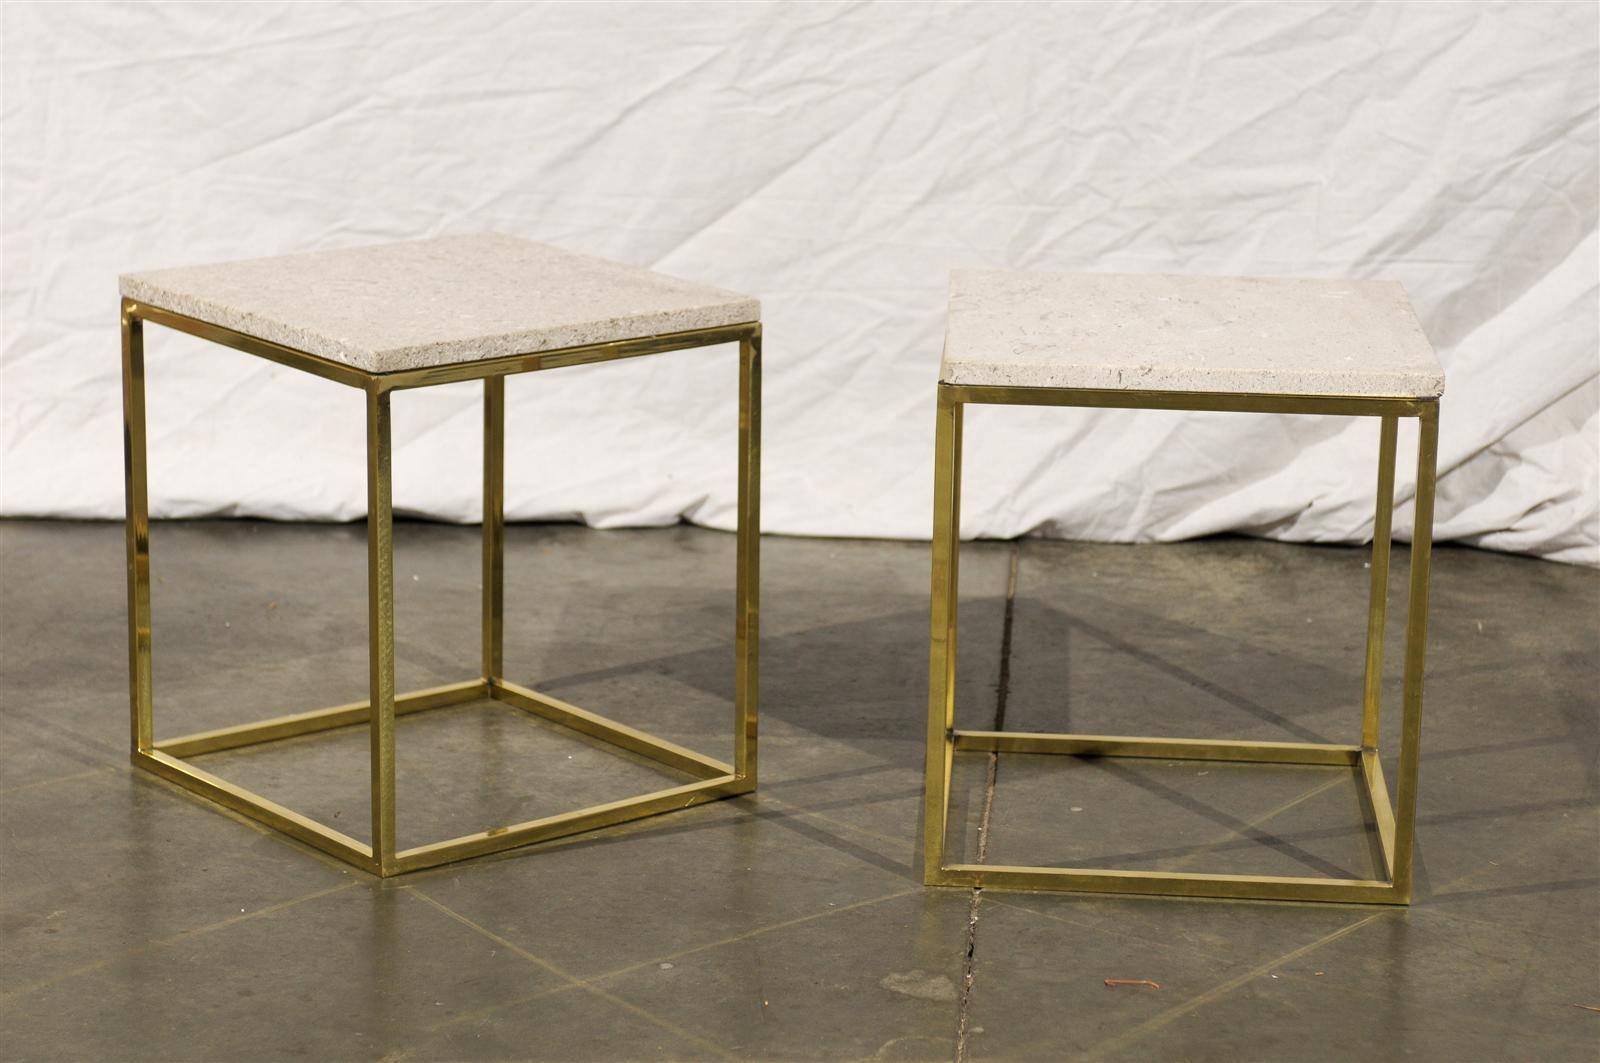 Pair of Travertine Top Brass Side Tables in the Style of Paul McCobb, 1950s.